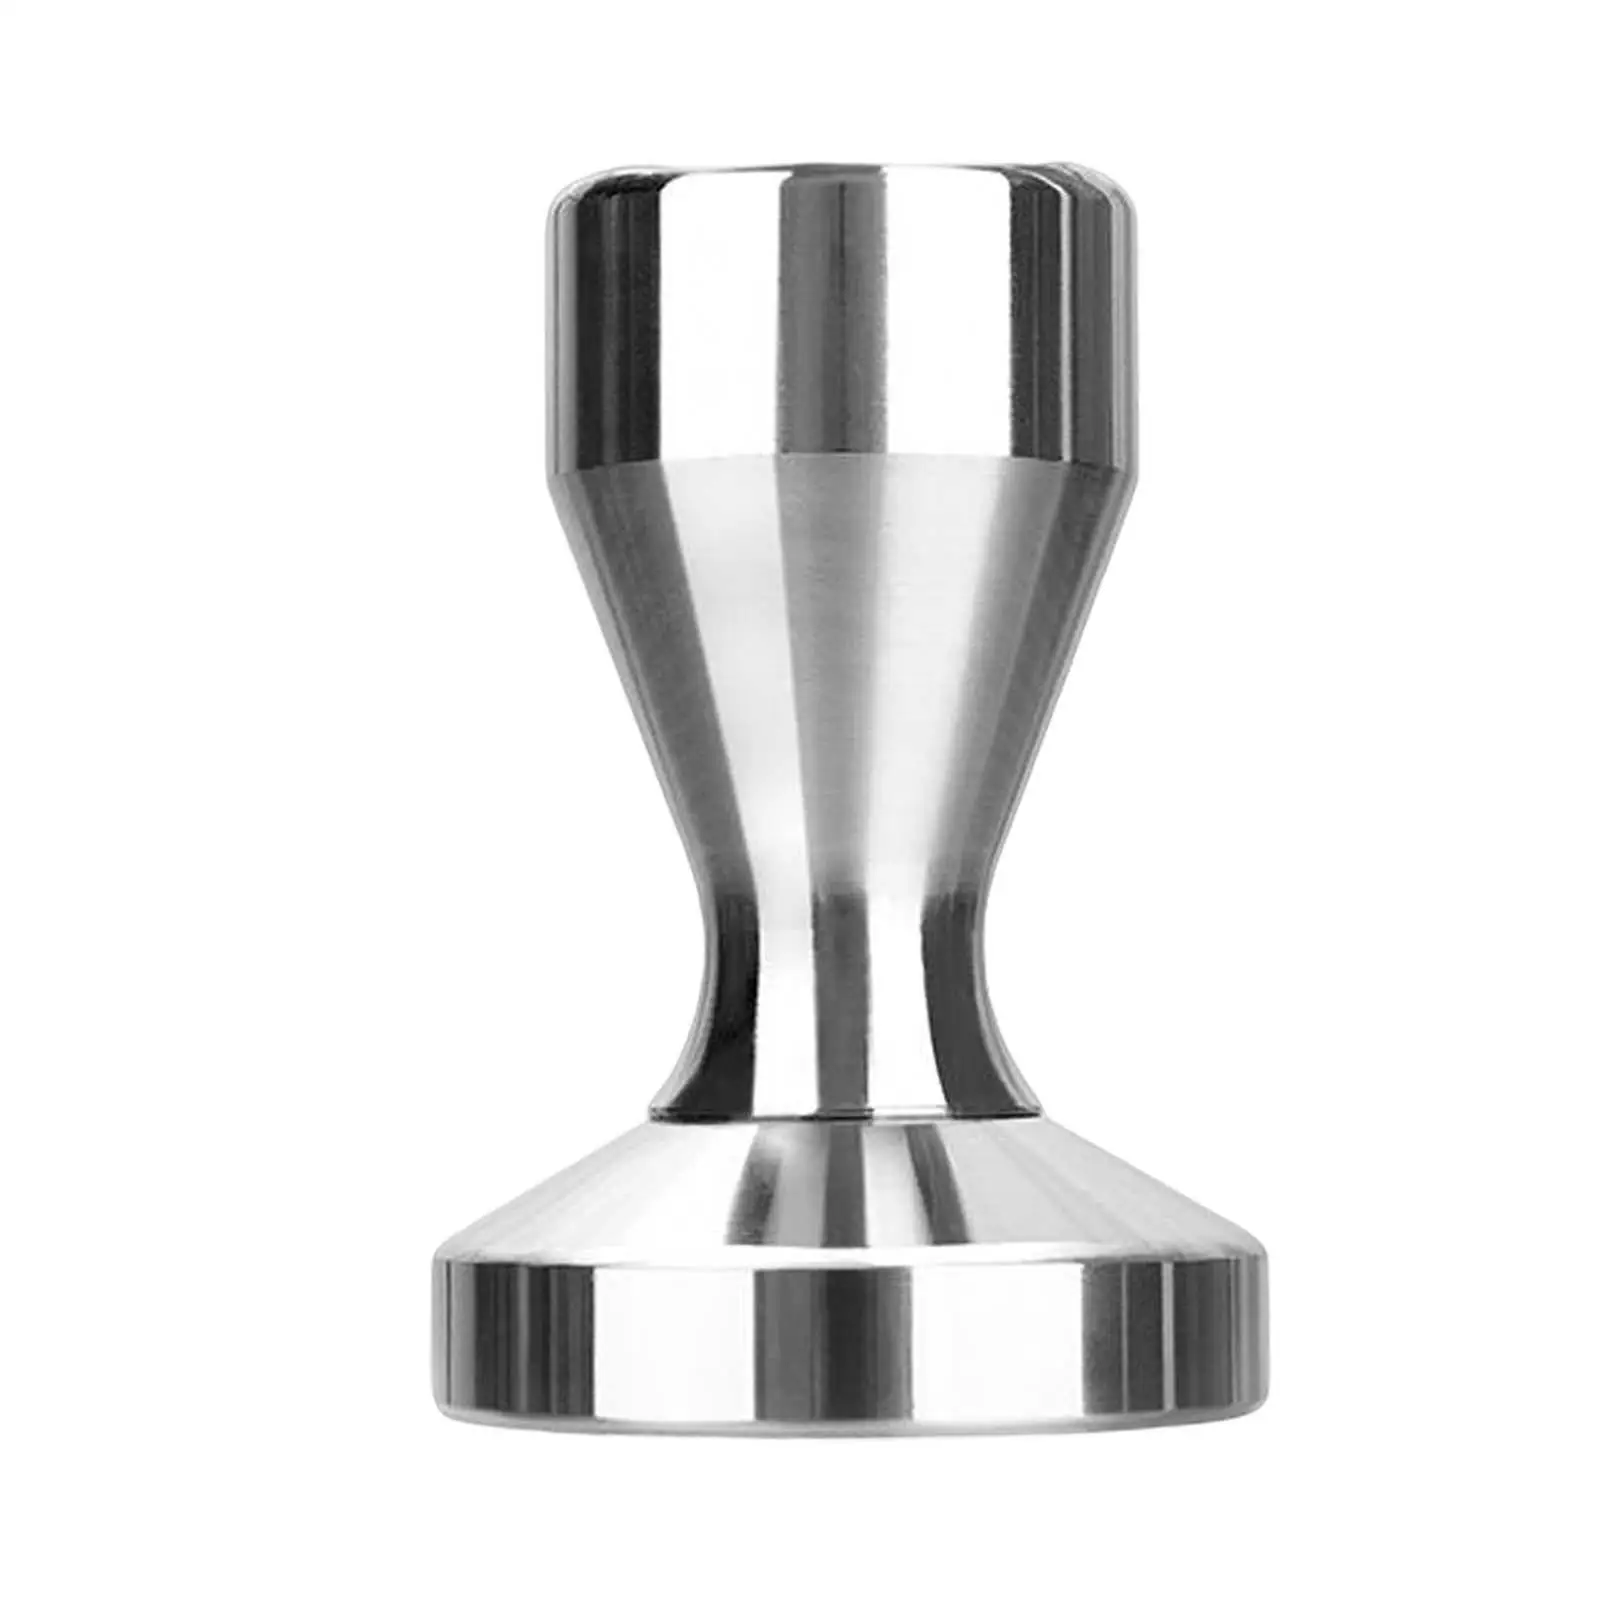 Stainless Steel Coffee Tamper Ergonomic Handle Polished Espresso Pressing Tool